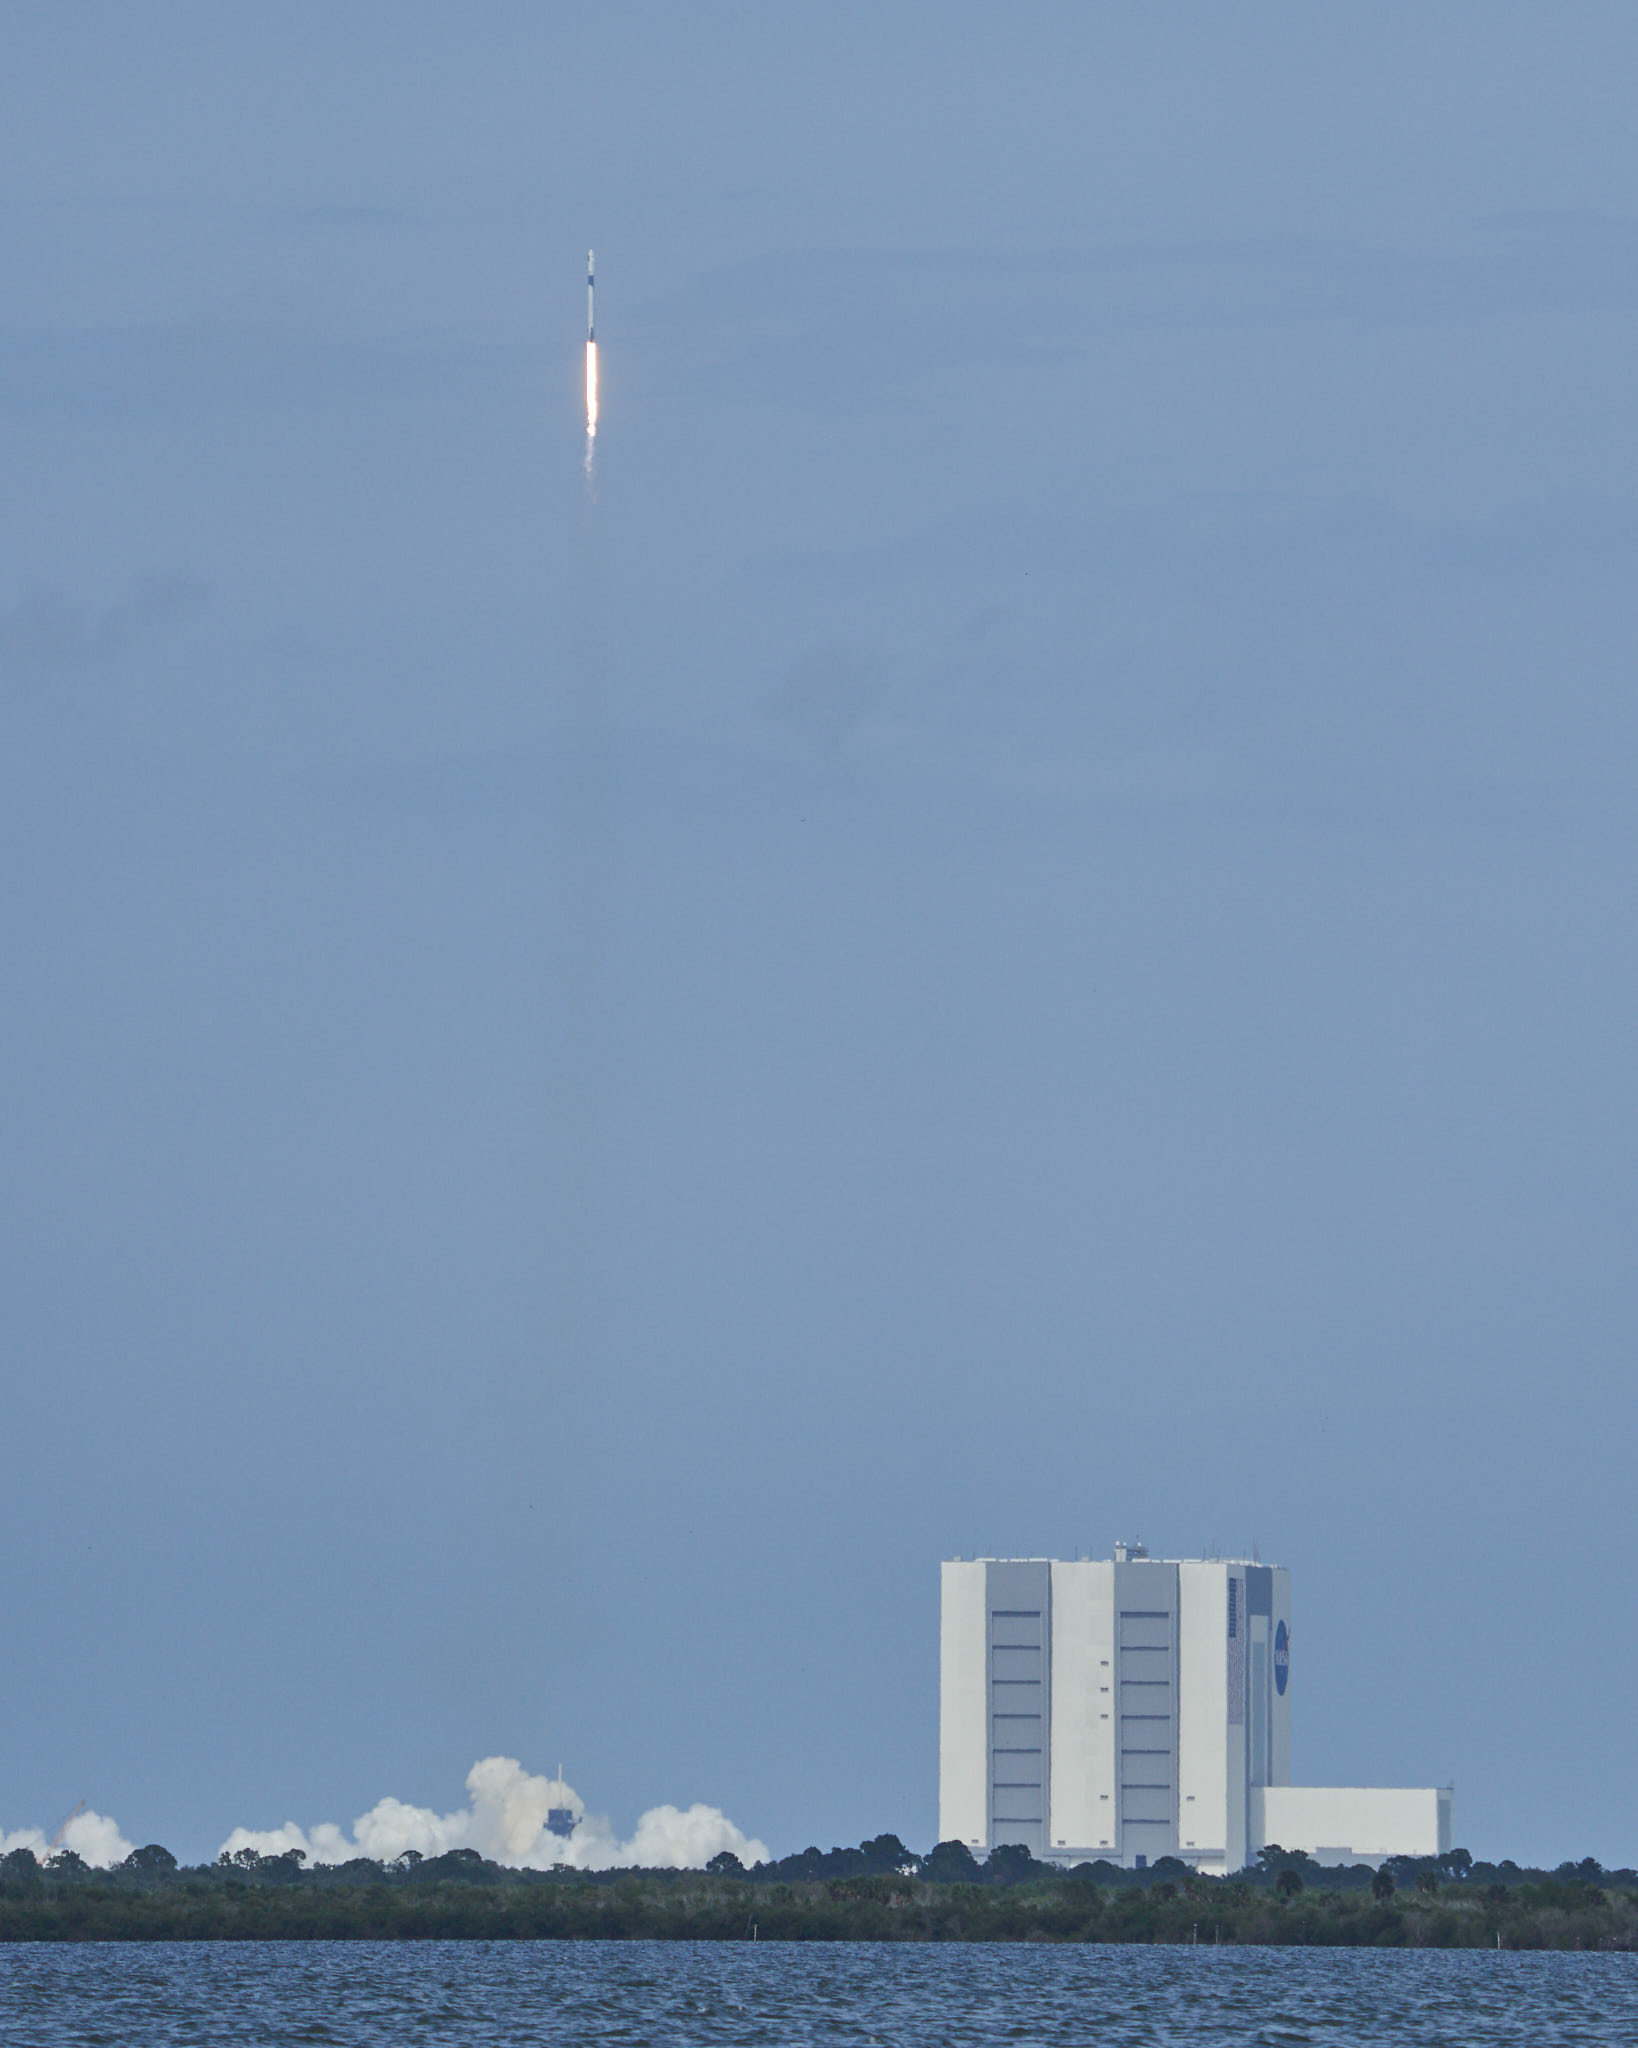 a rocket launching in the sky